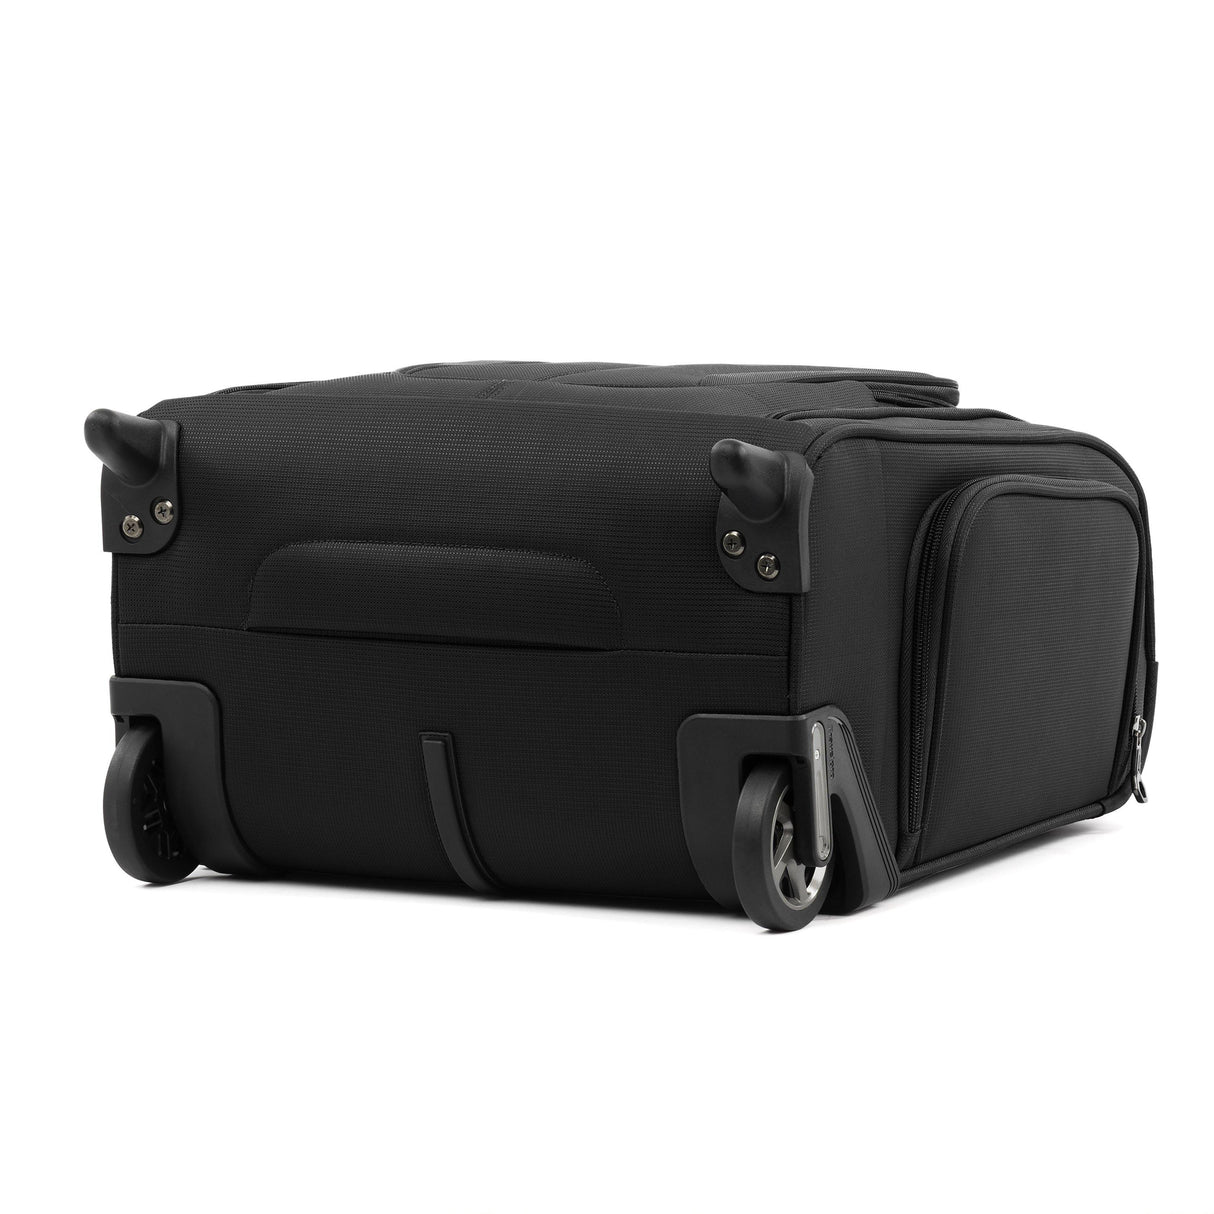 Travelpro Tourlite Rolling Underseat Carry-On , , ac4e6c59401c3767b37b7659484abdcc7b741d5f9df35c726ecac0944e10a99d